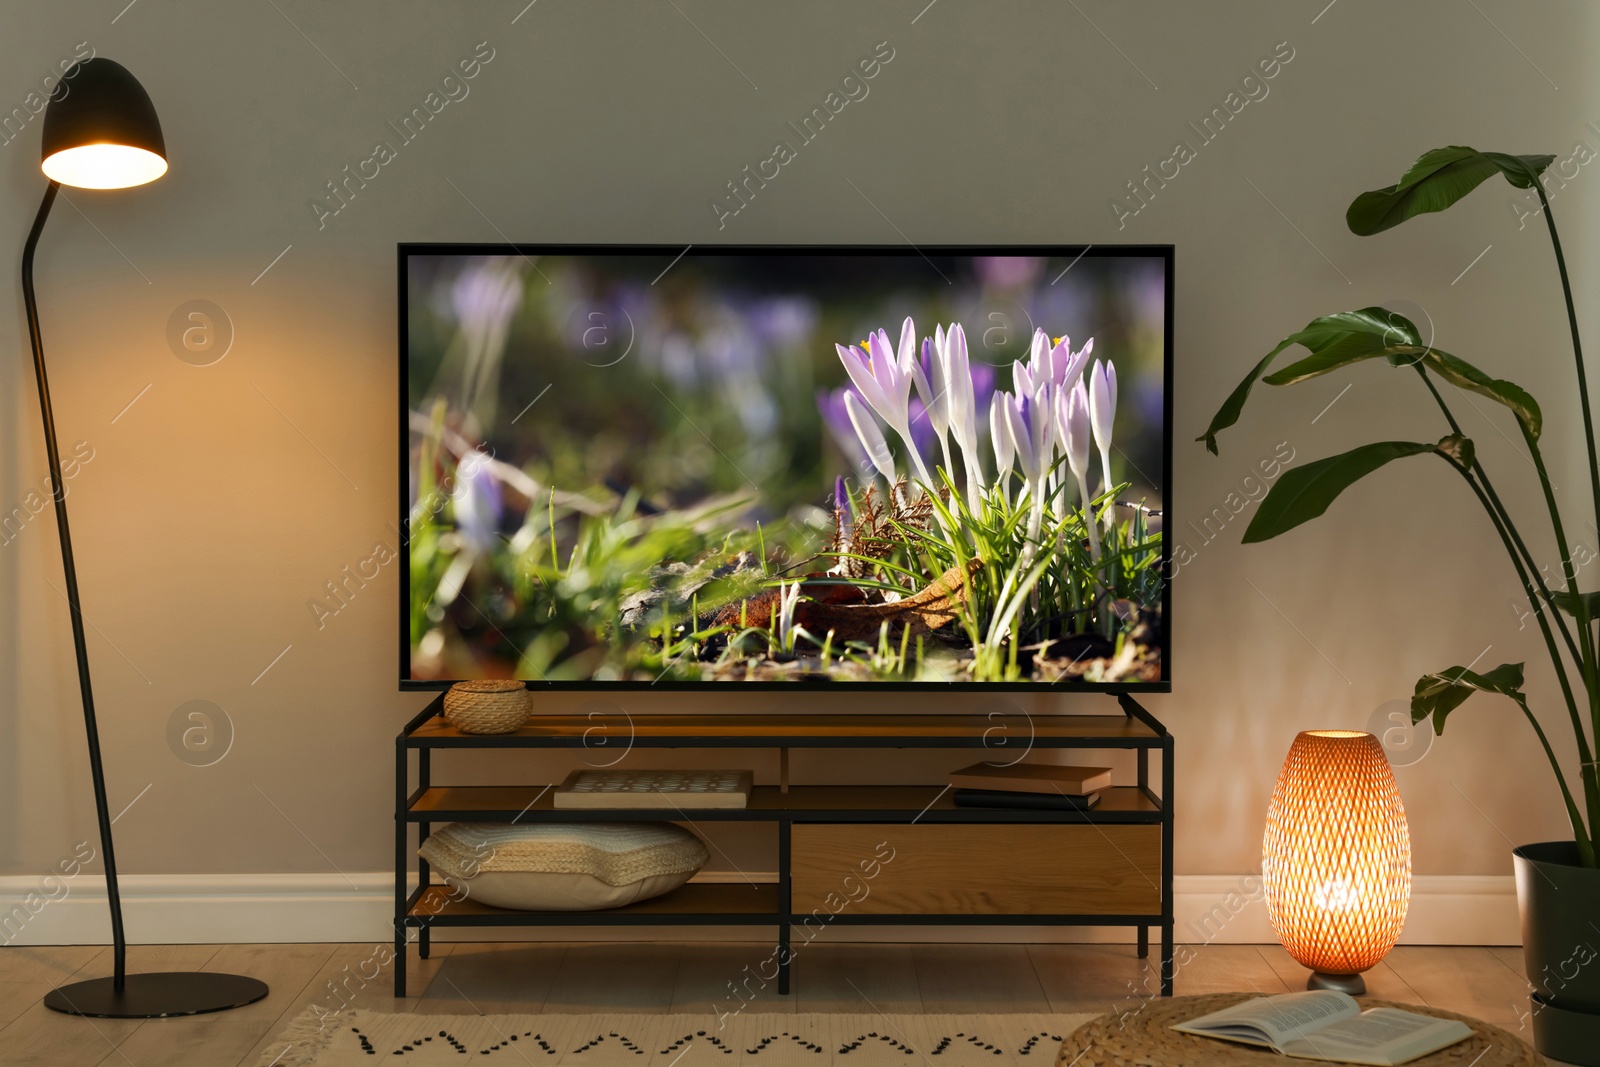 Image of Small flowers on TV screen in room